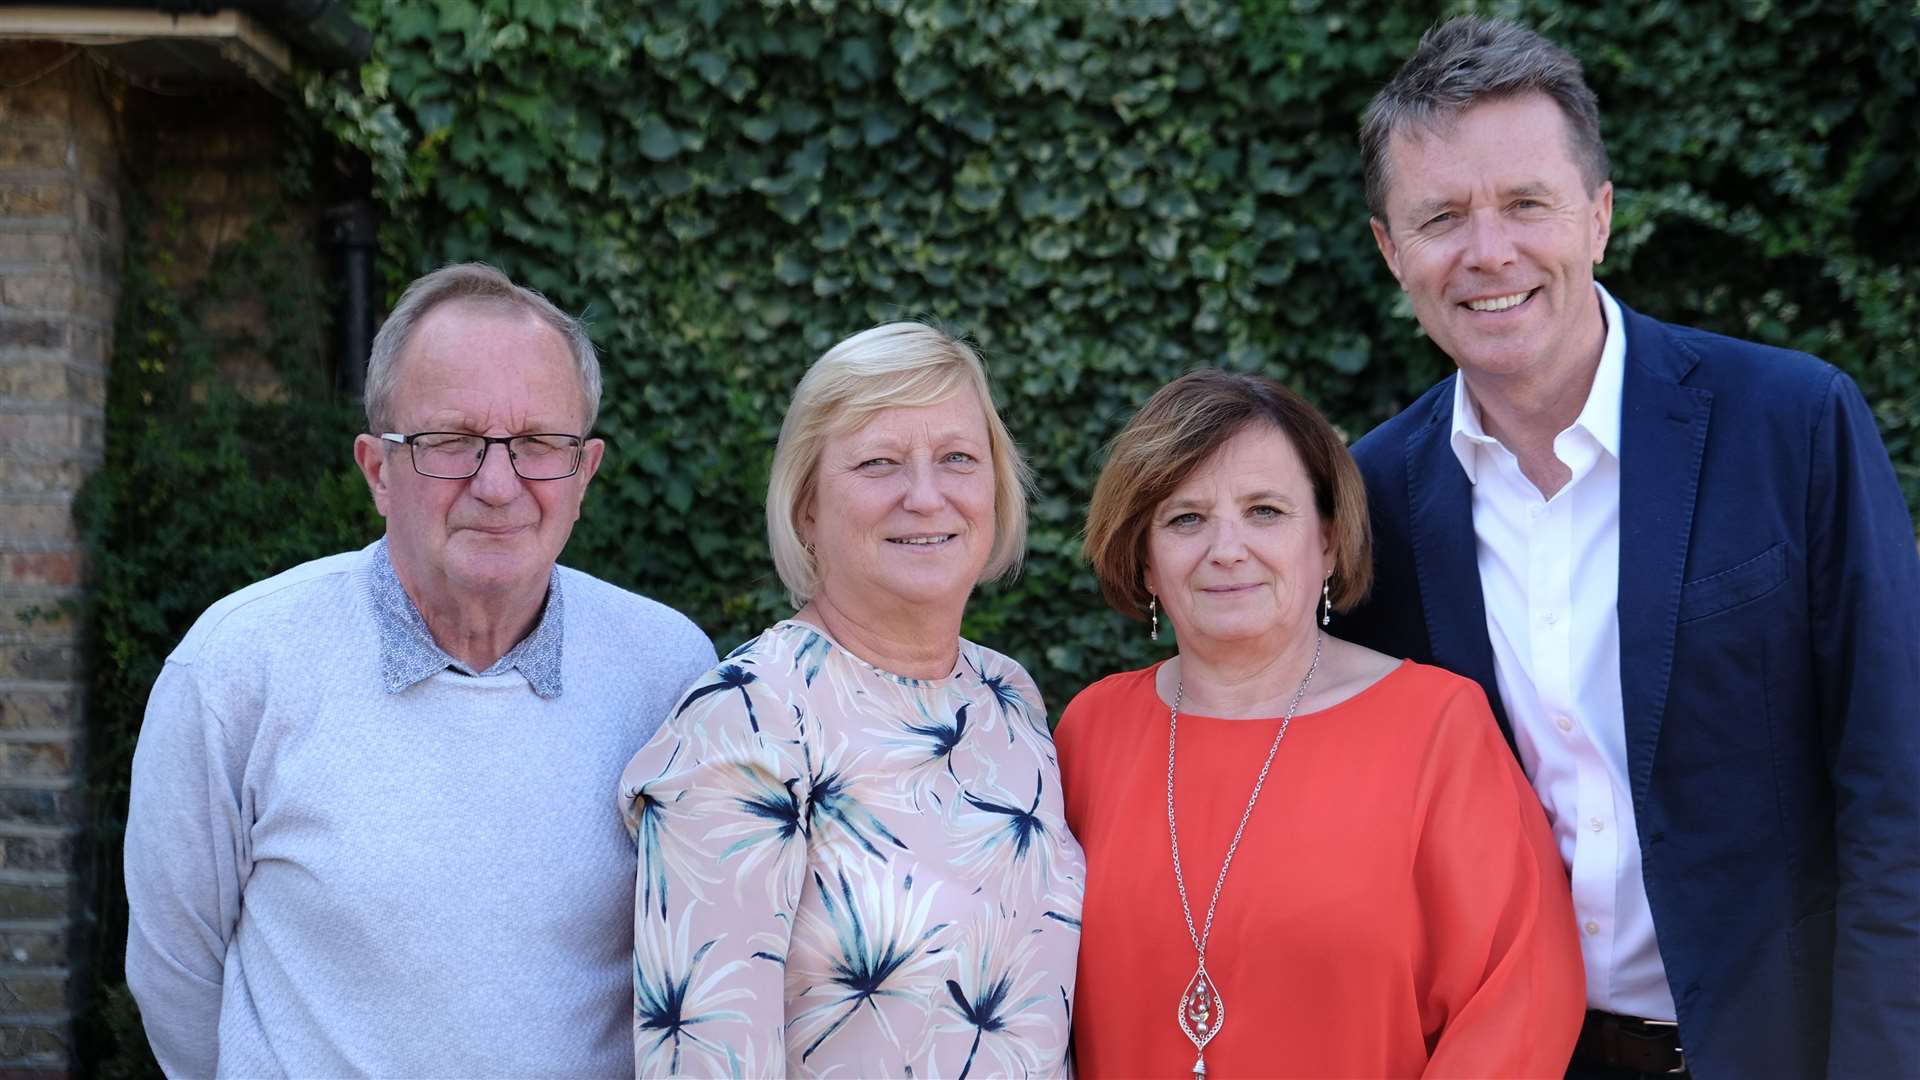 Nicky Campbell meets Simon's family to tell them about their "baby" brother Photo: ITV